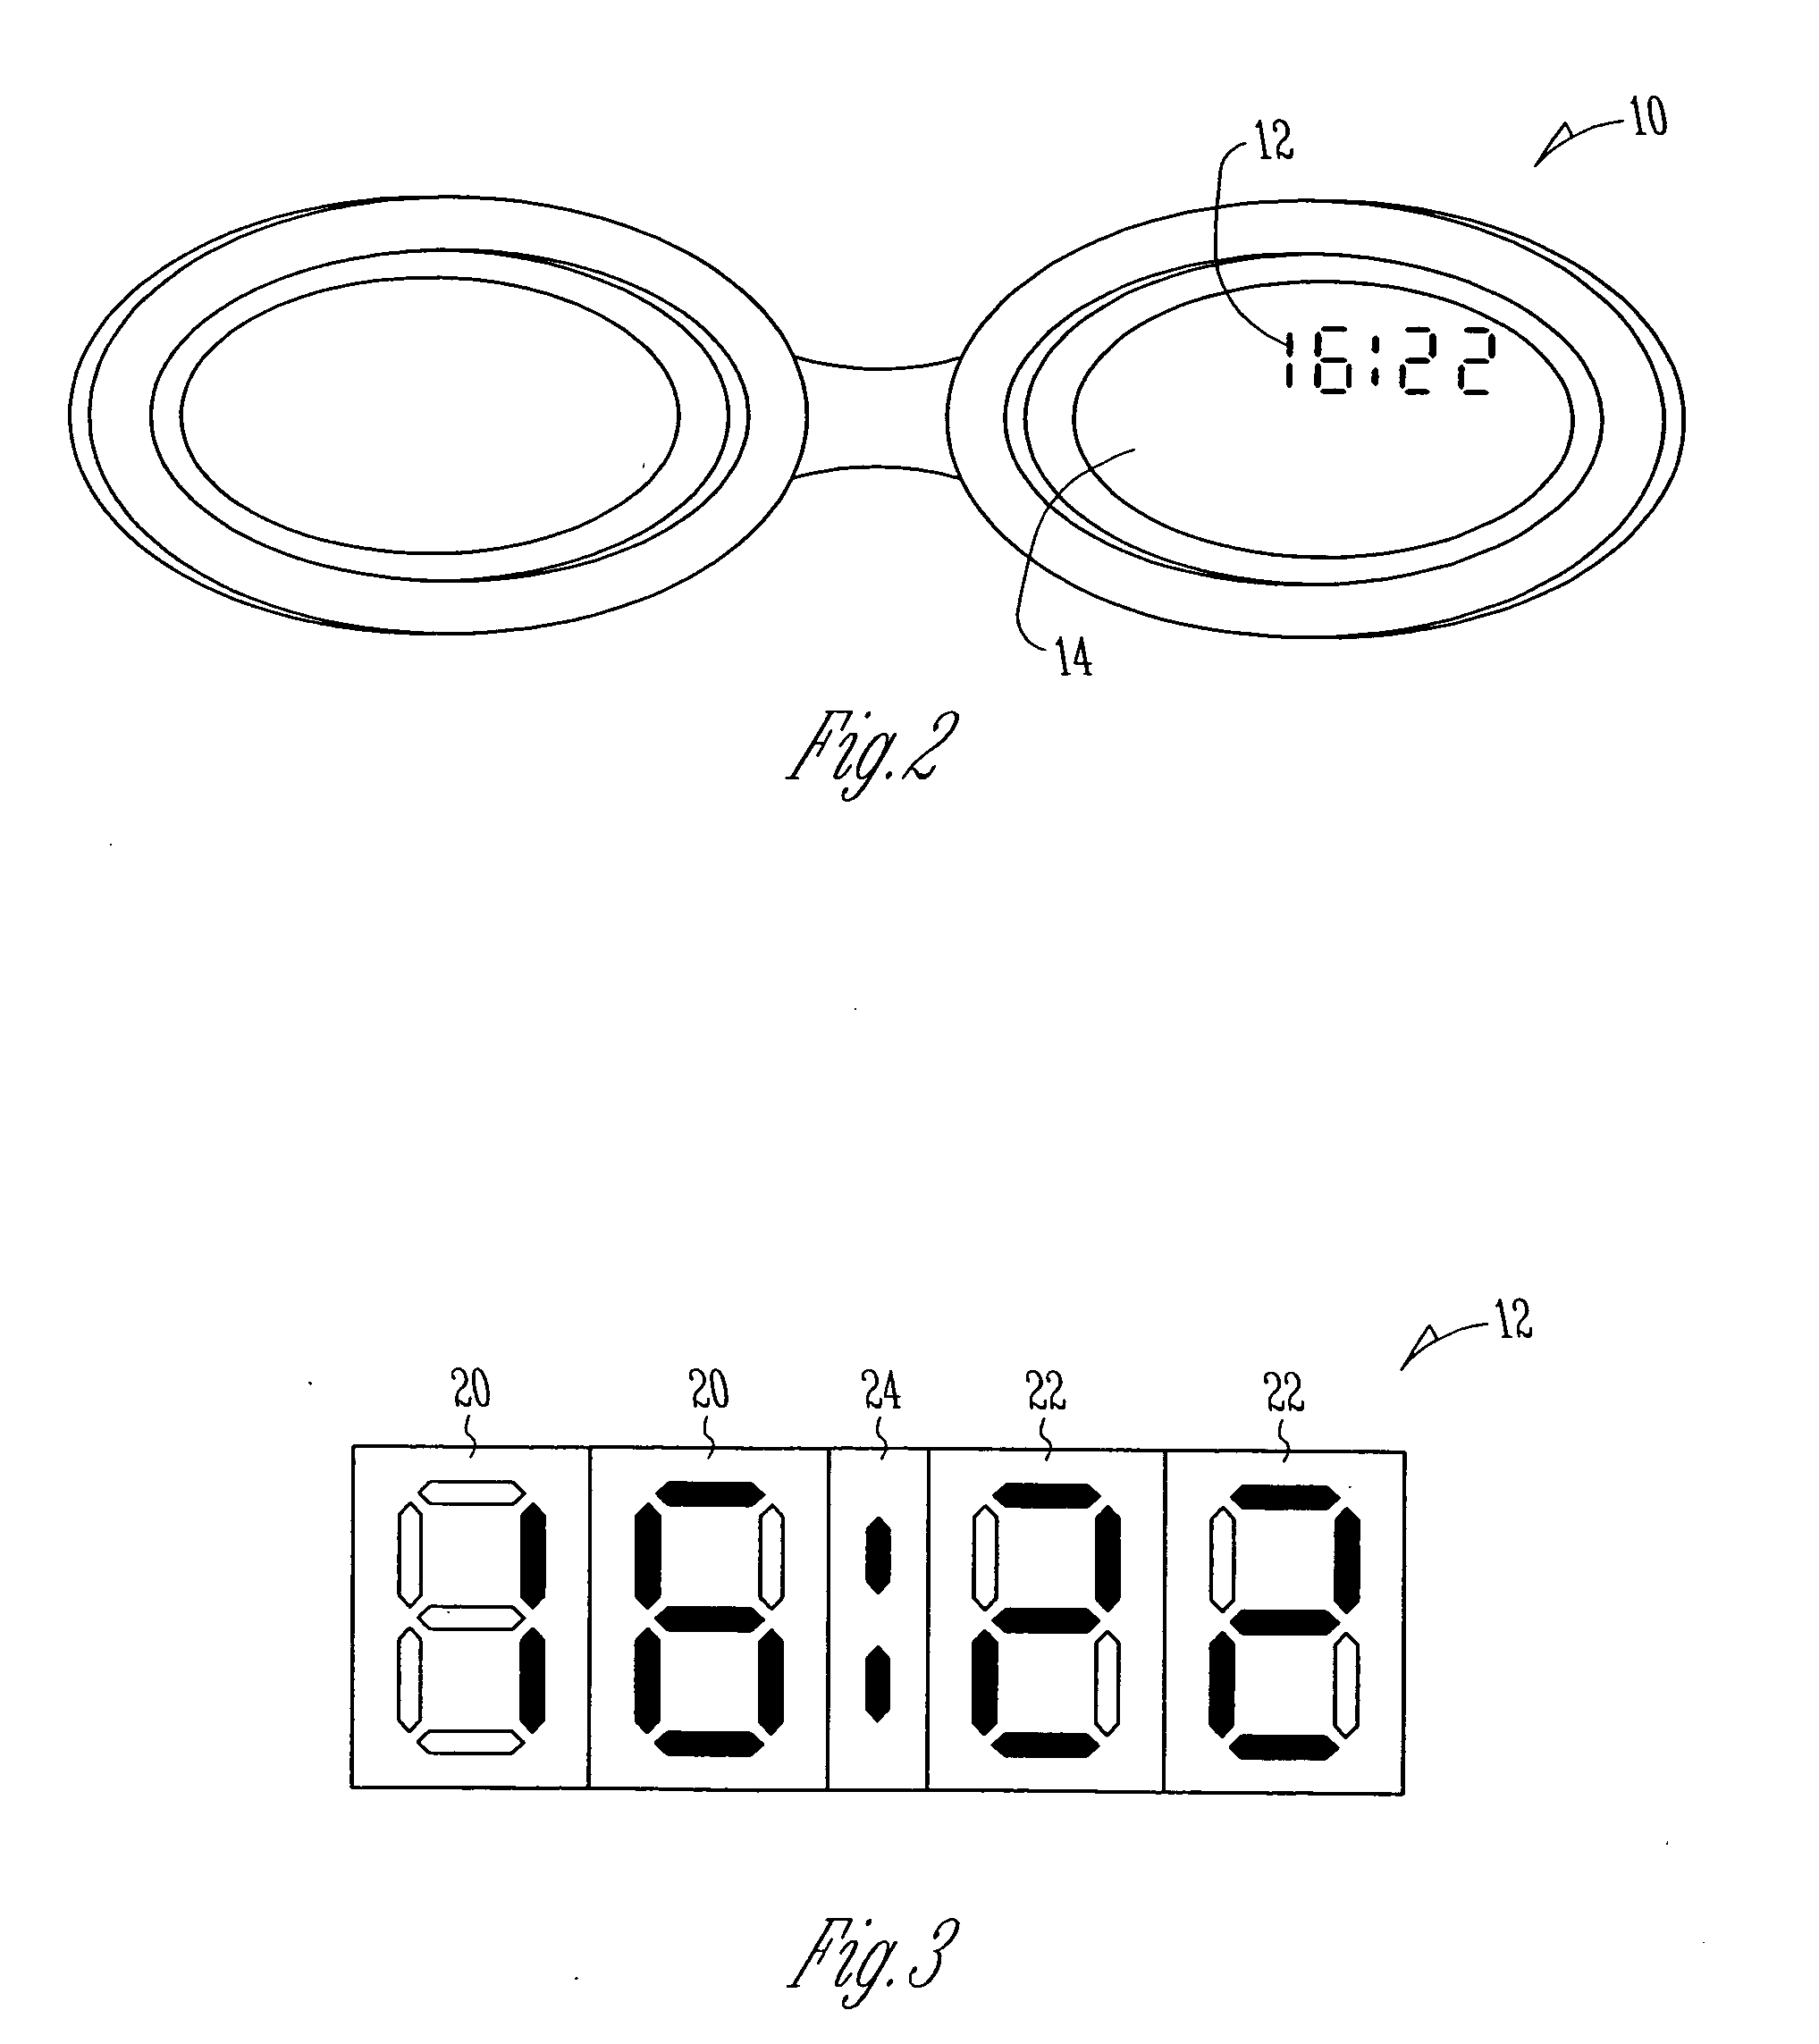 System and method for displaying information on athletic eyewear